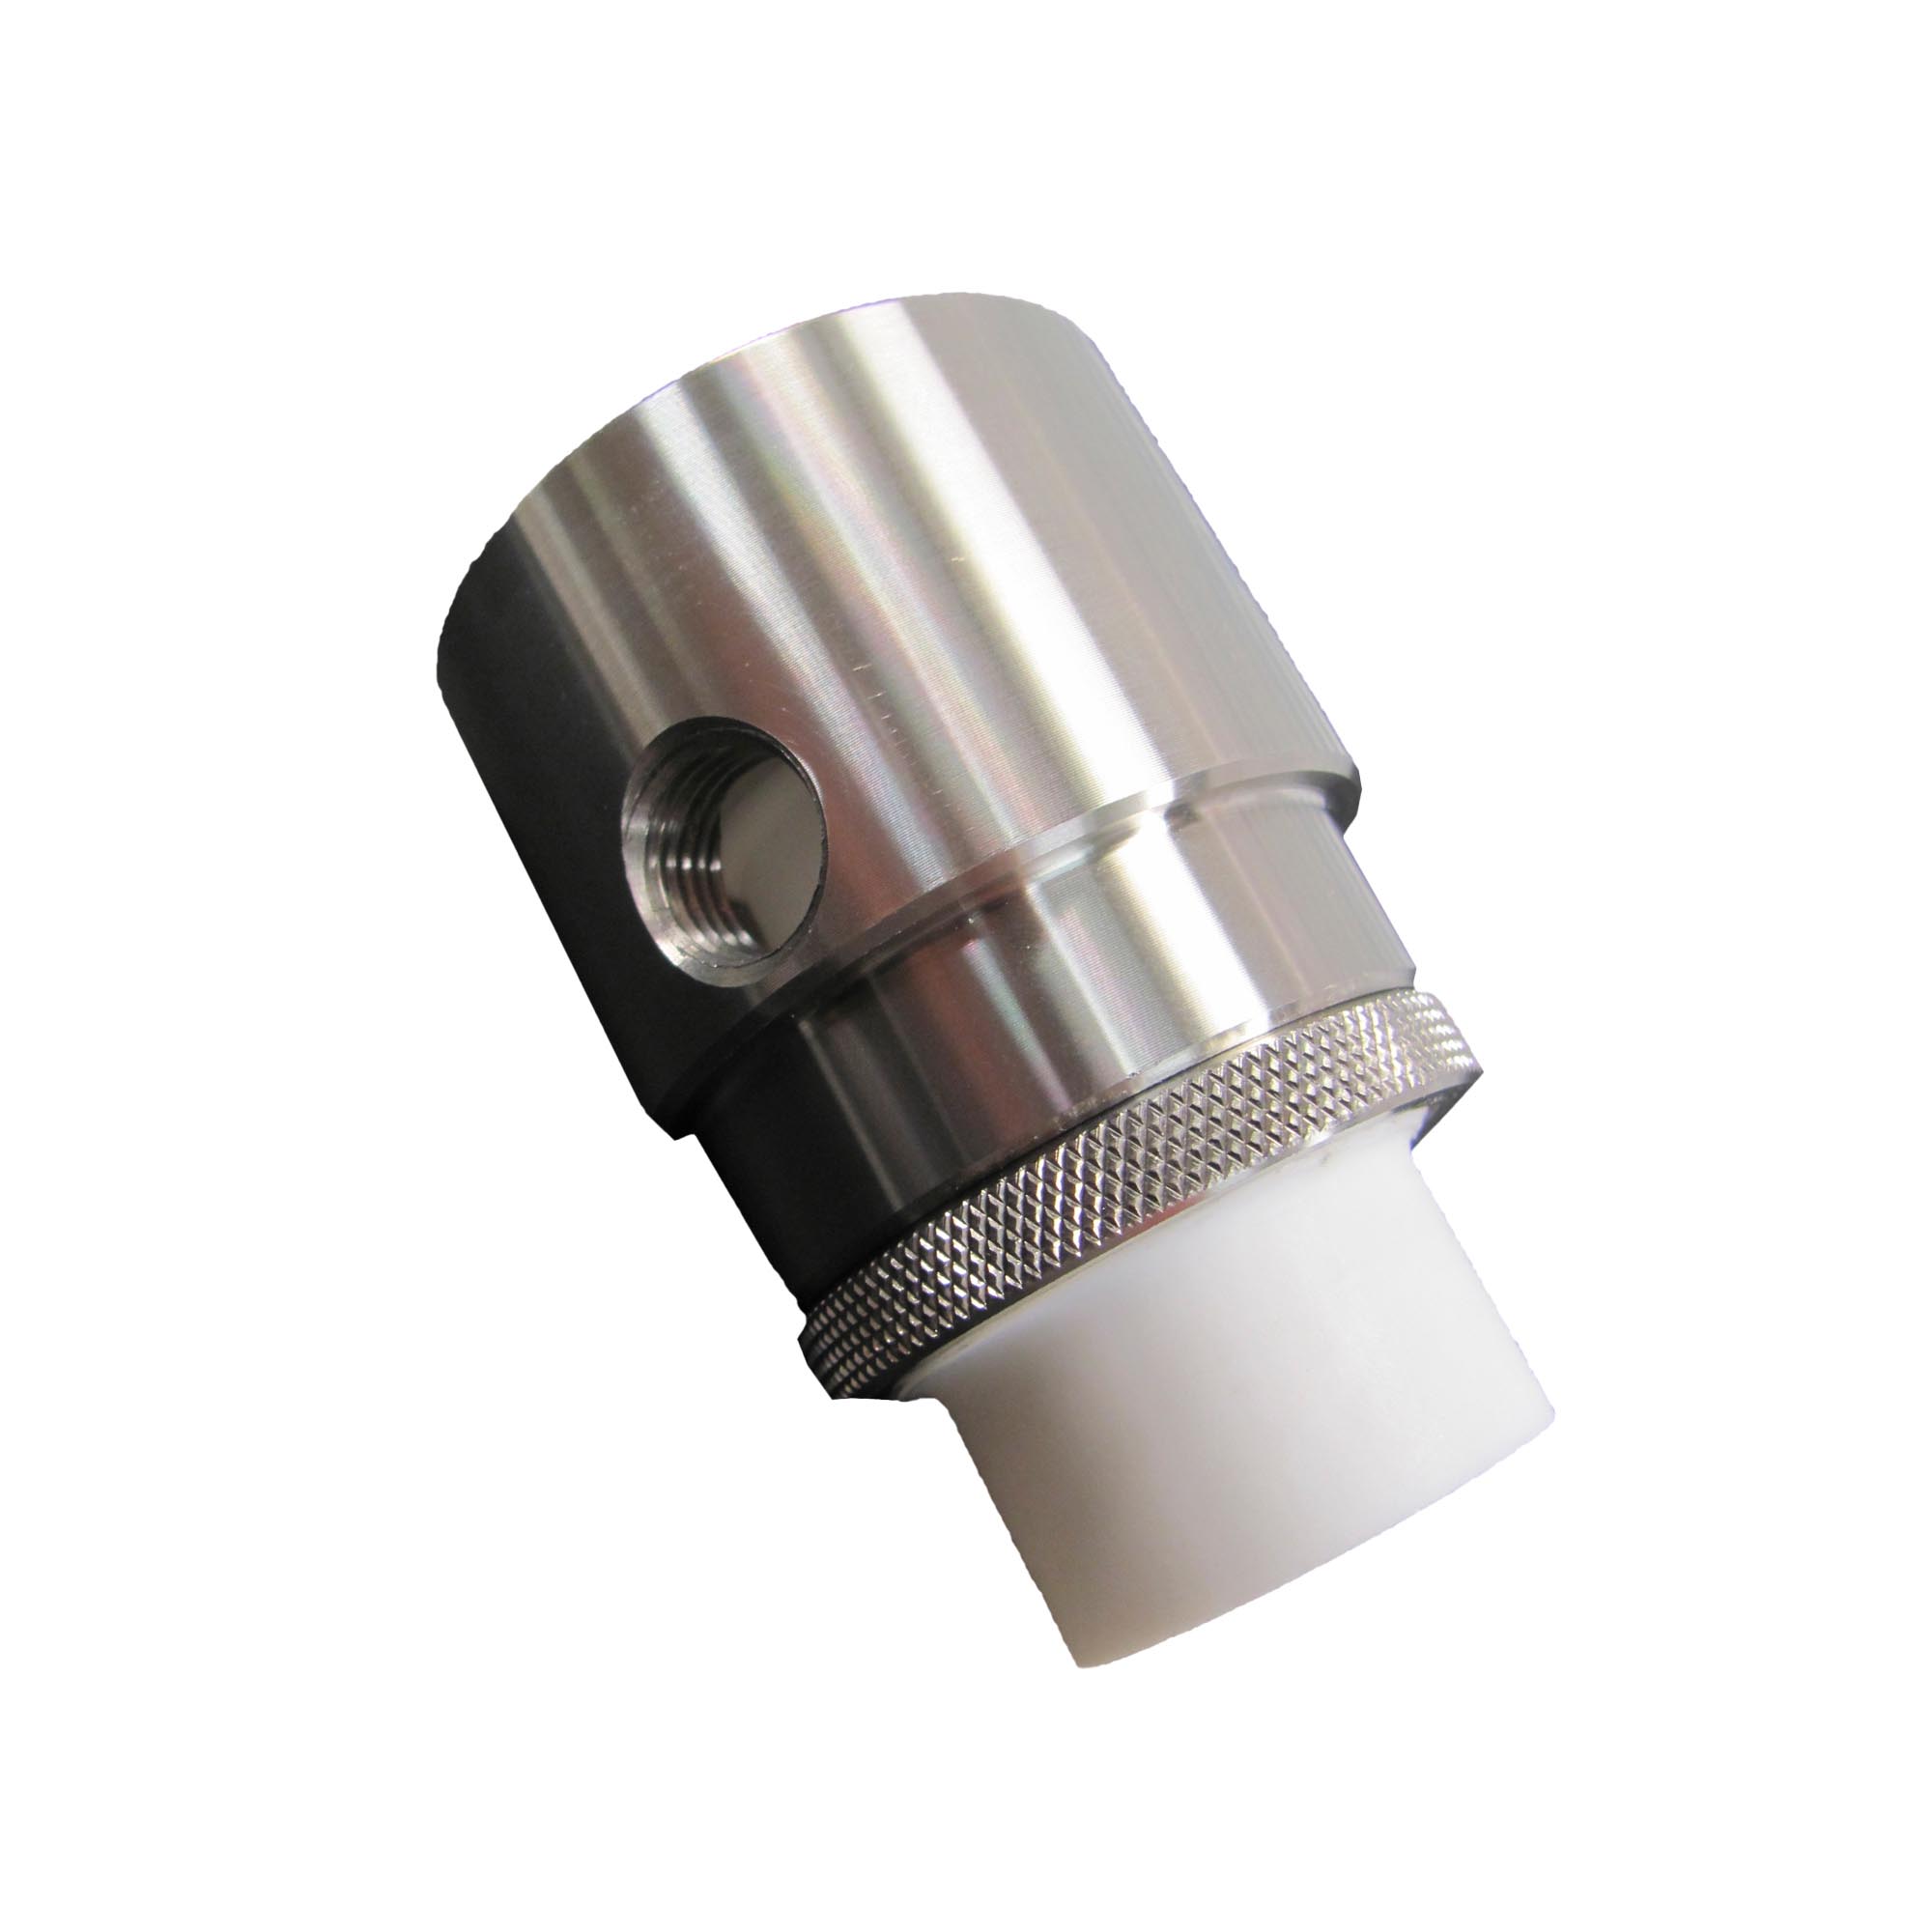 Special Adjustable Air Amplifier with PTFE plug